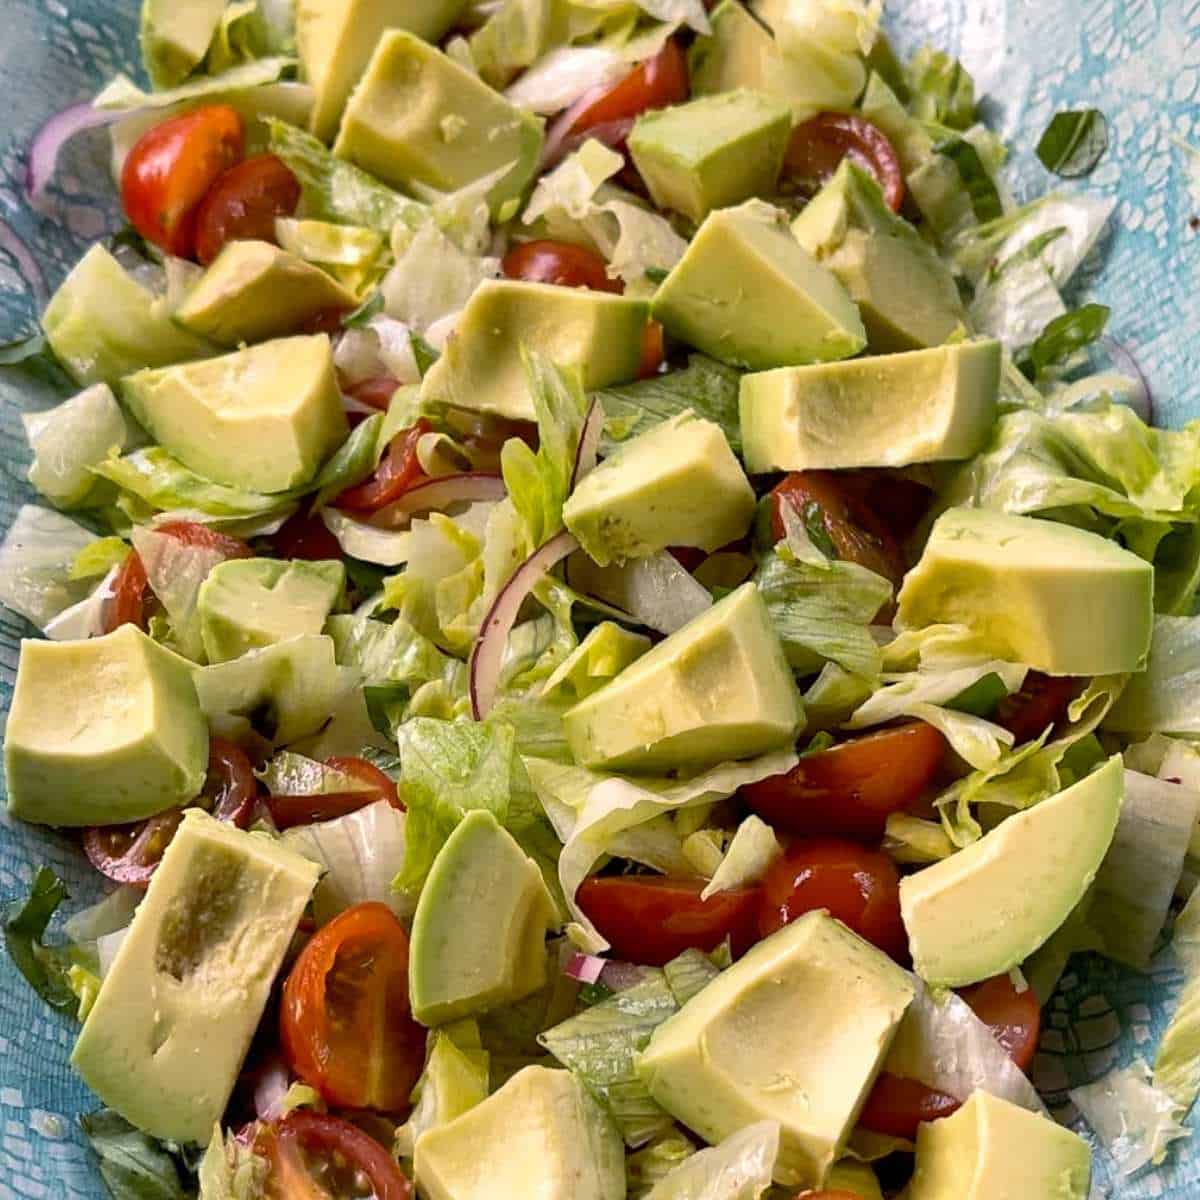 Lettuce, avocado, red onion and cherry tomatoes in a dish.